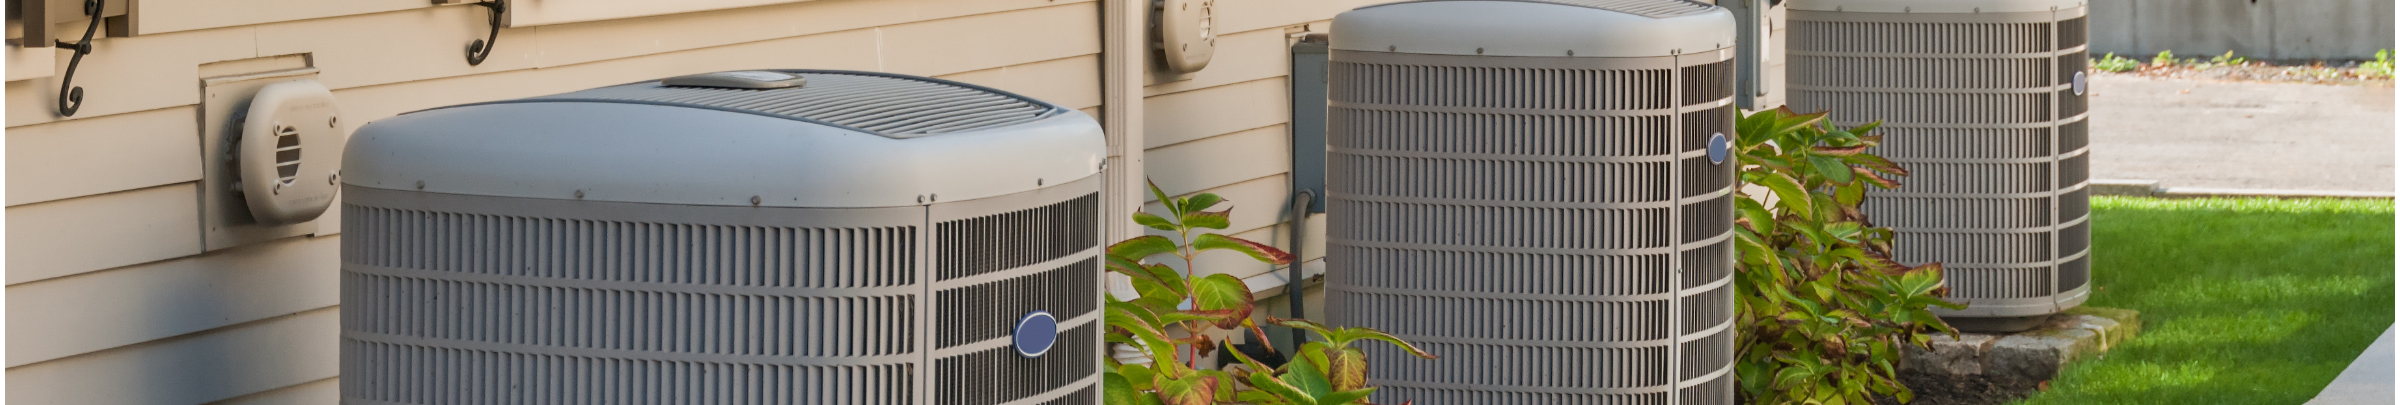 Staying comfortable year round isn't hard when your heating and cooling systems are properly sized and installed. Call B.F. Mahn today to schedule your installation!